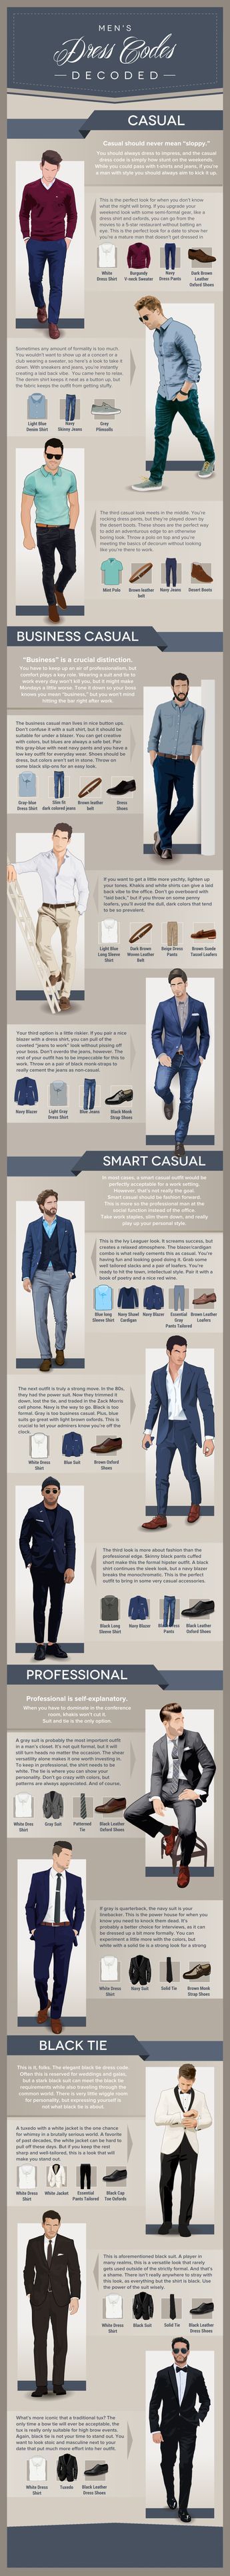 Fashion infographic : Business Casual For Men - Visual Guide ...